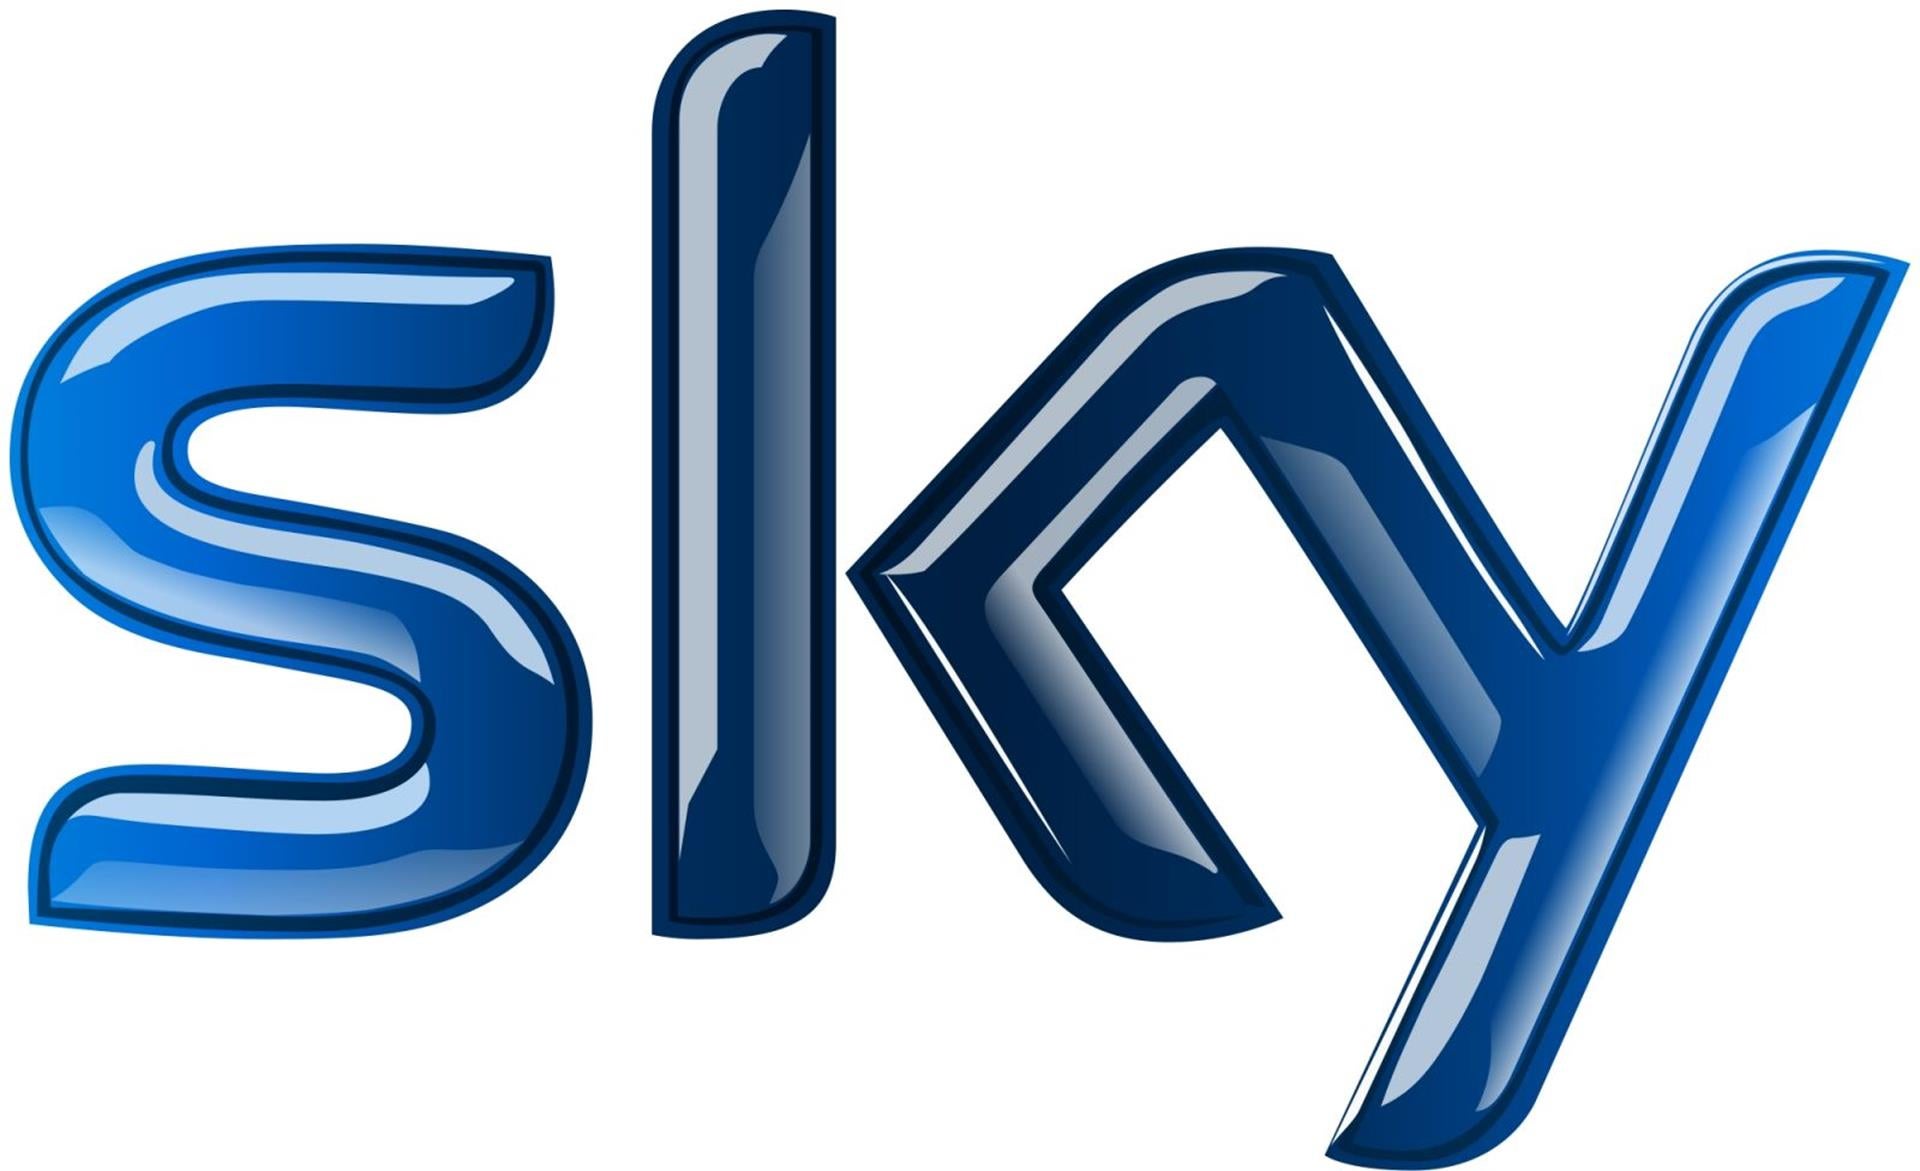 Image for PS4 users in the UK can now download the Sky TV app